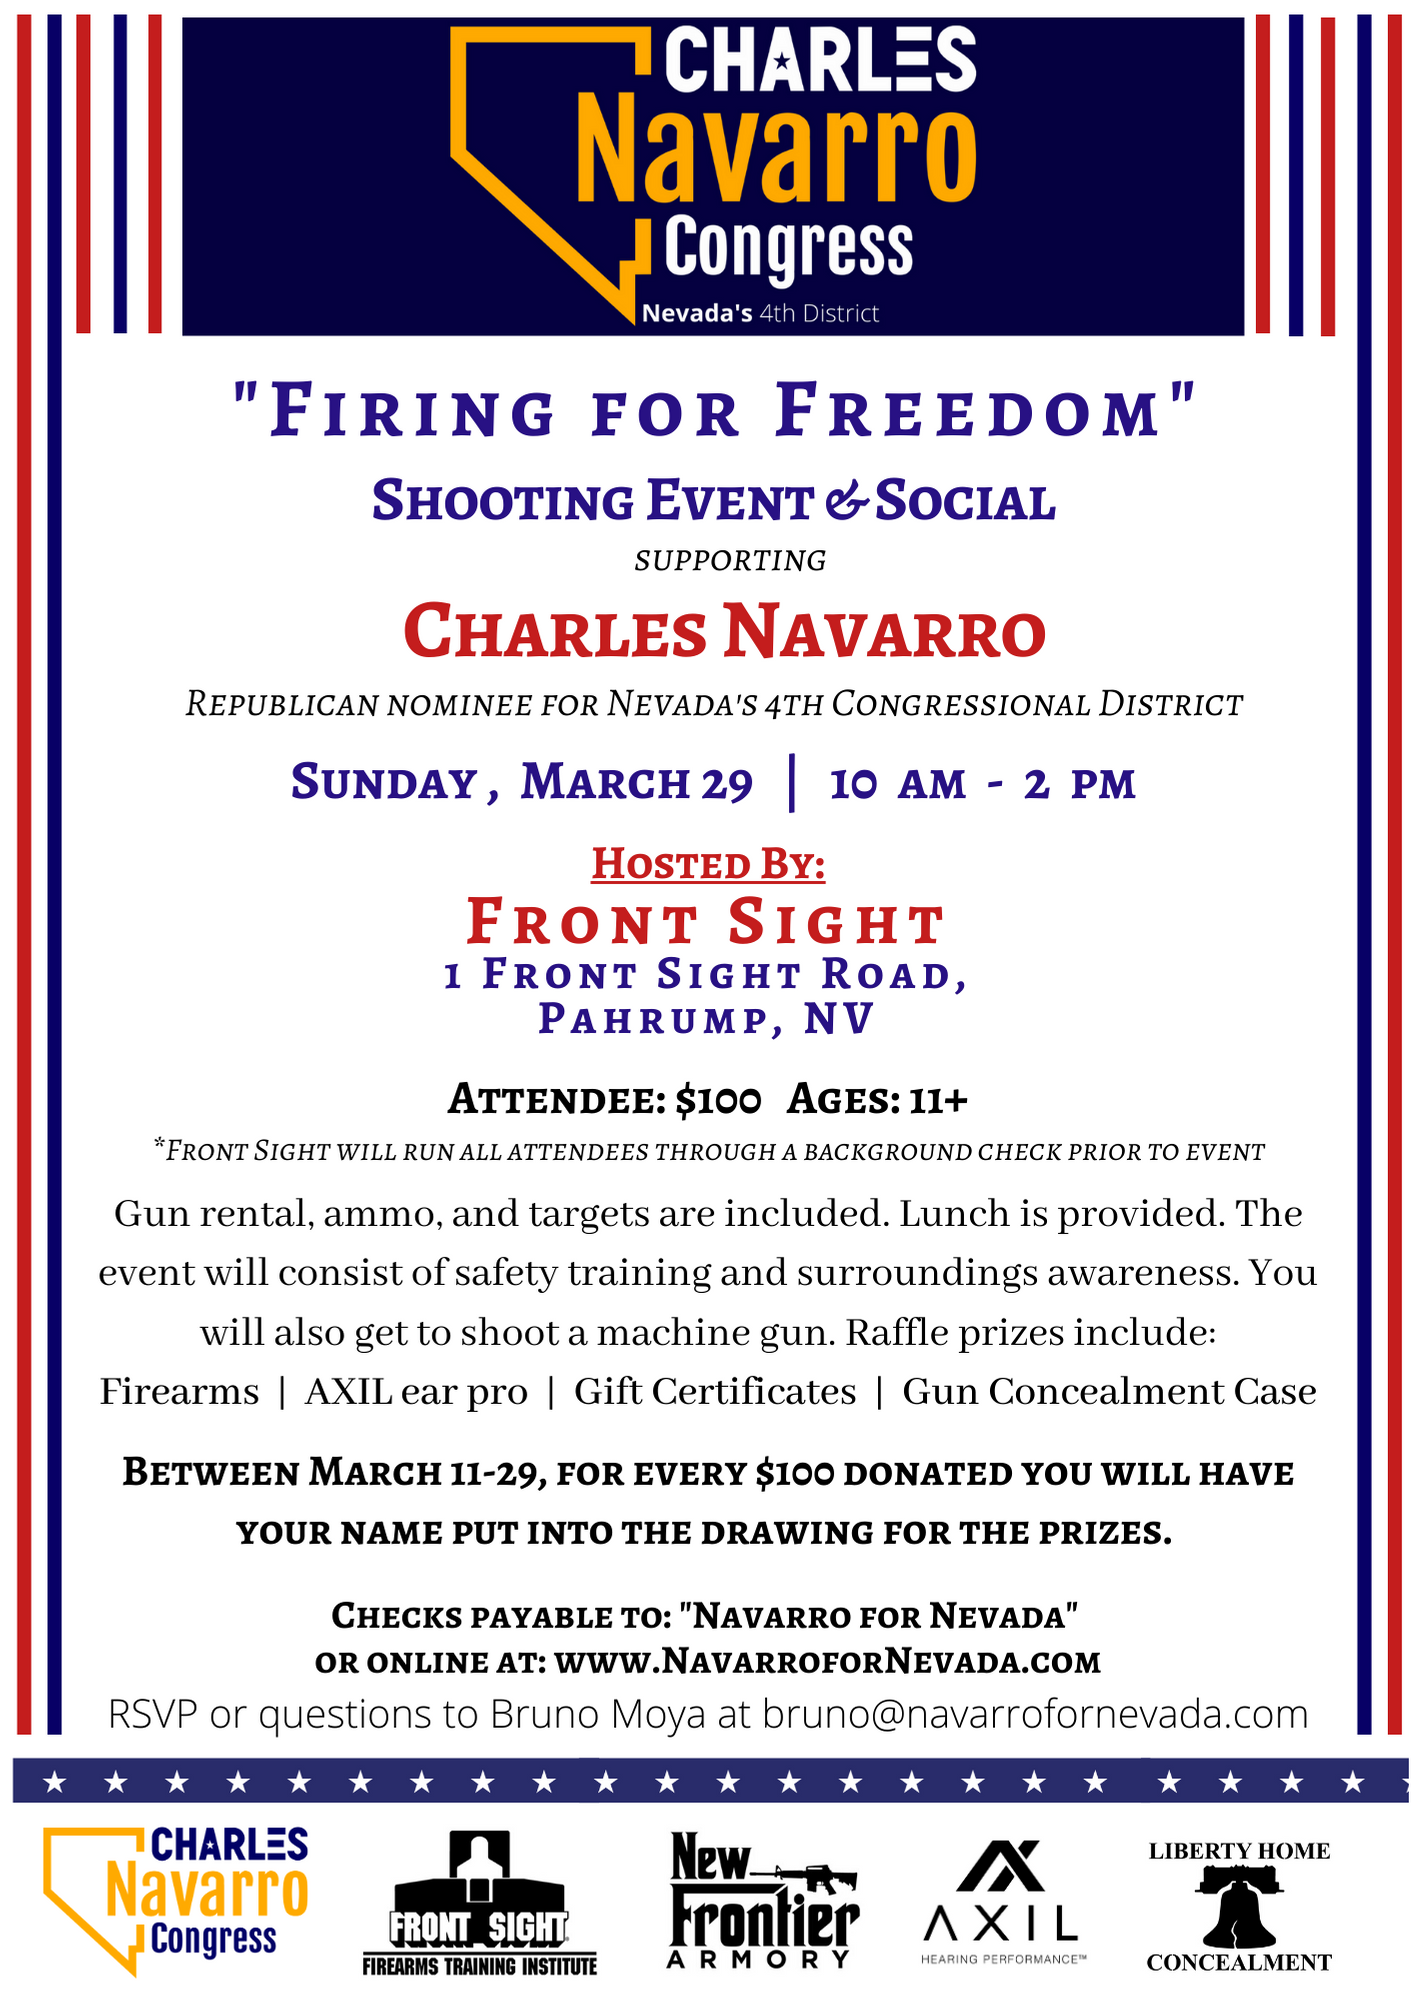 Firing for Freedom - A Fundraiser Supporting Charles Navarro for Congress